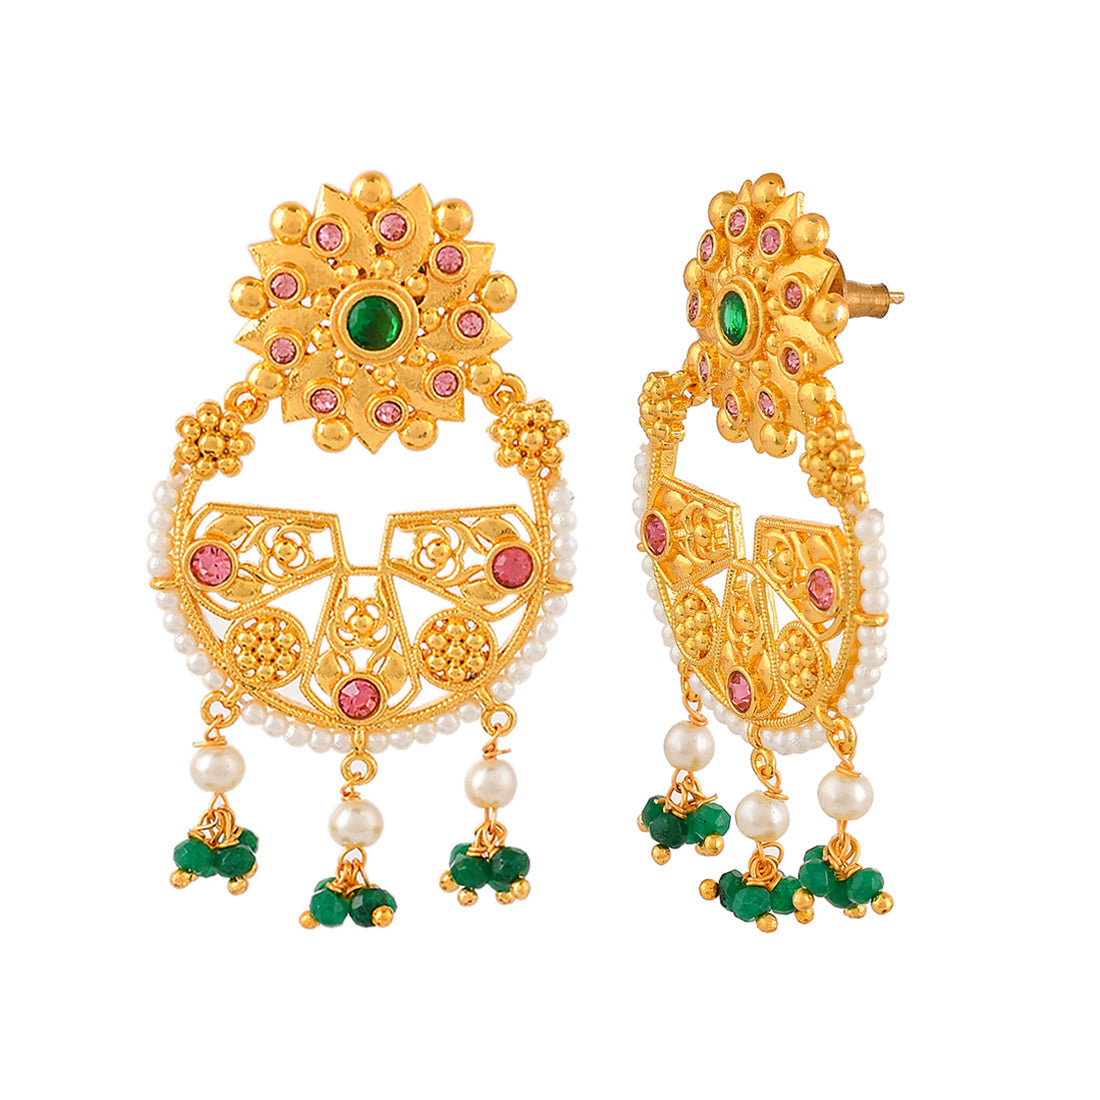 Women's Abharan Green Stones And White Pearls Floral Earrings - Voylla